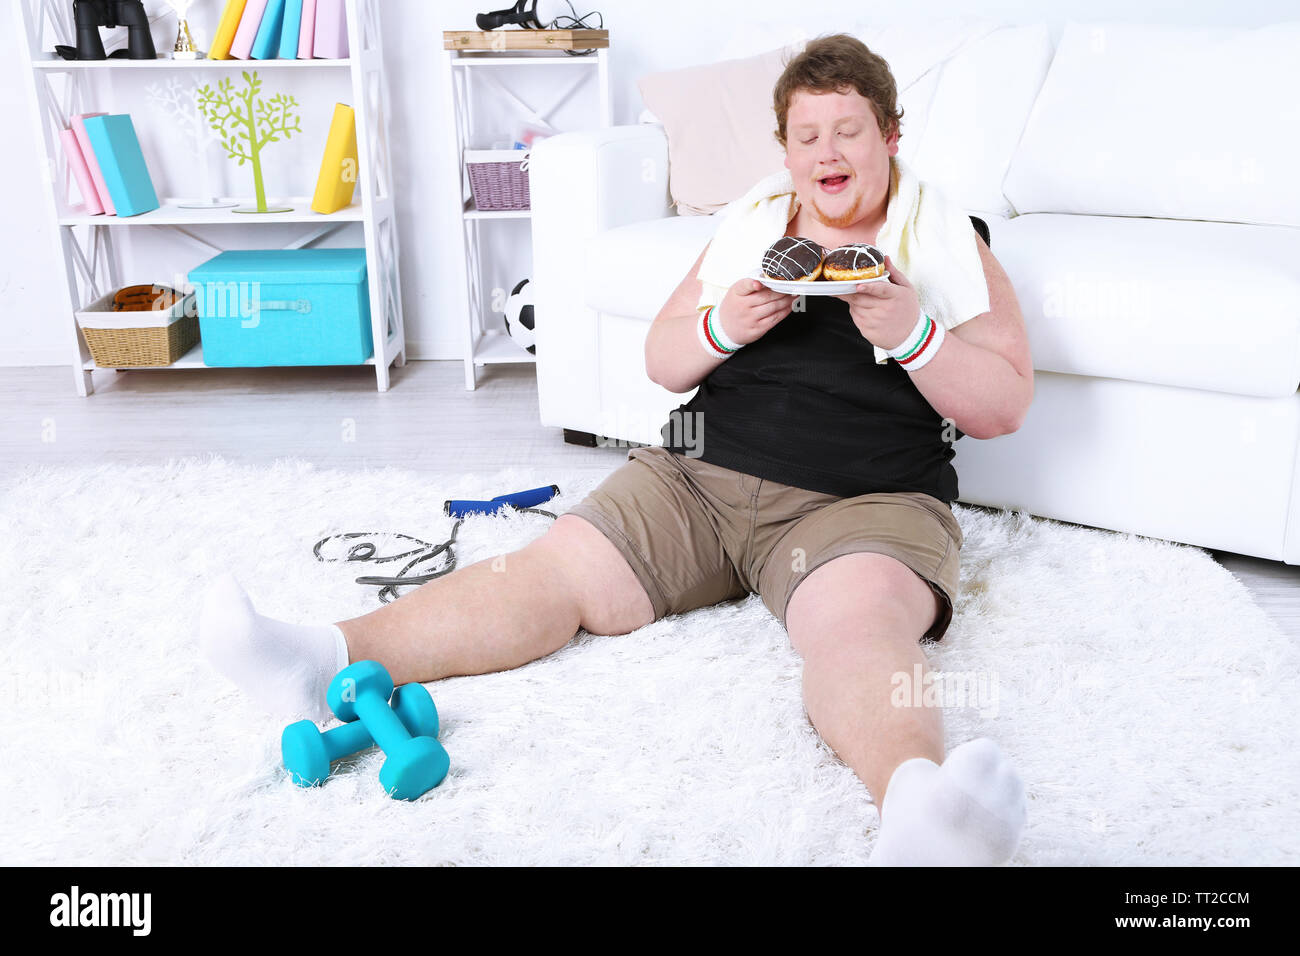 Large fitness man eating unhealthy food and trying to take exercise  at home Stock Photo